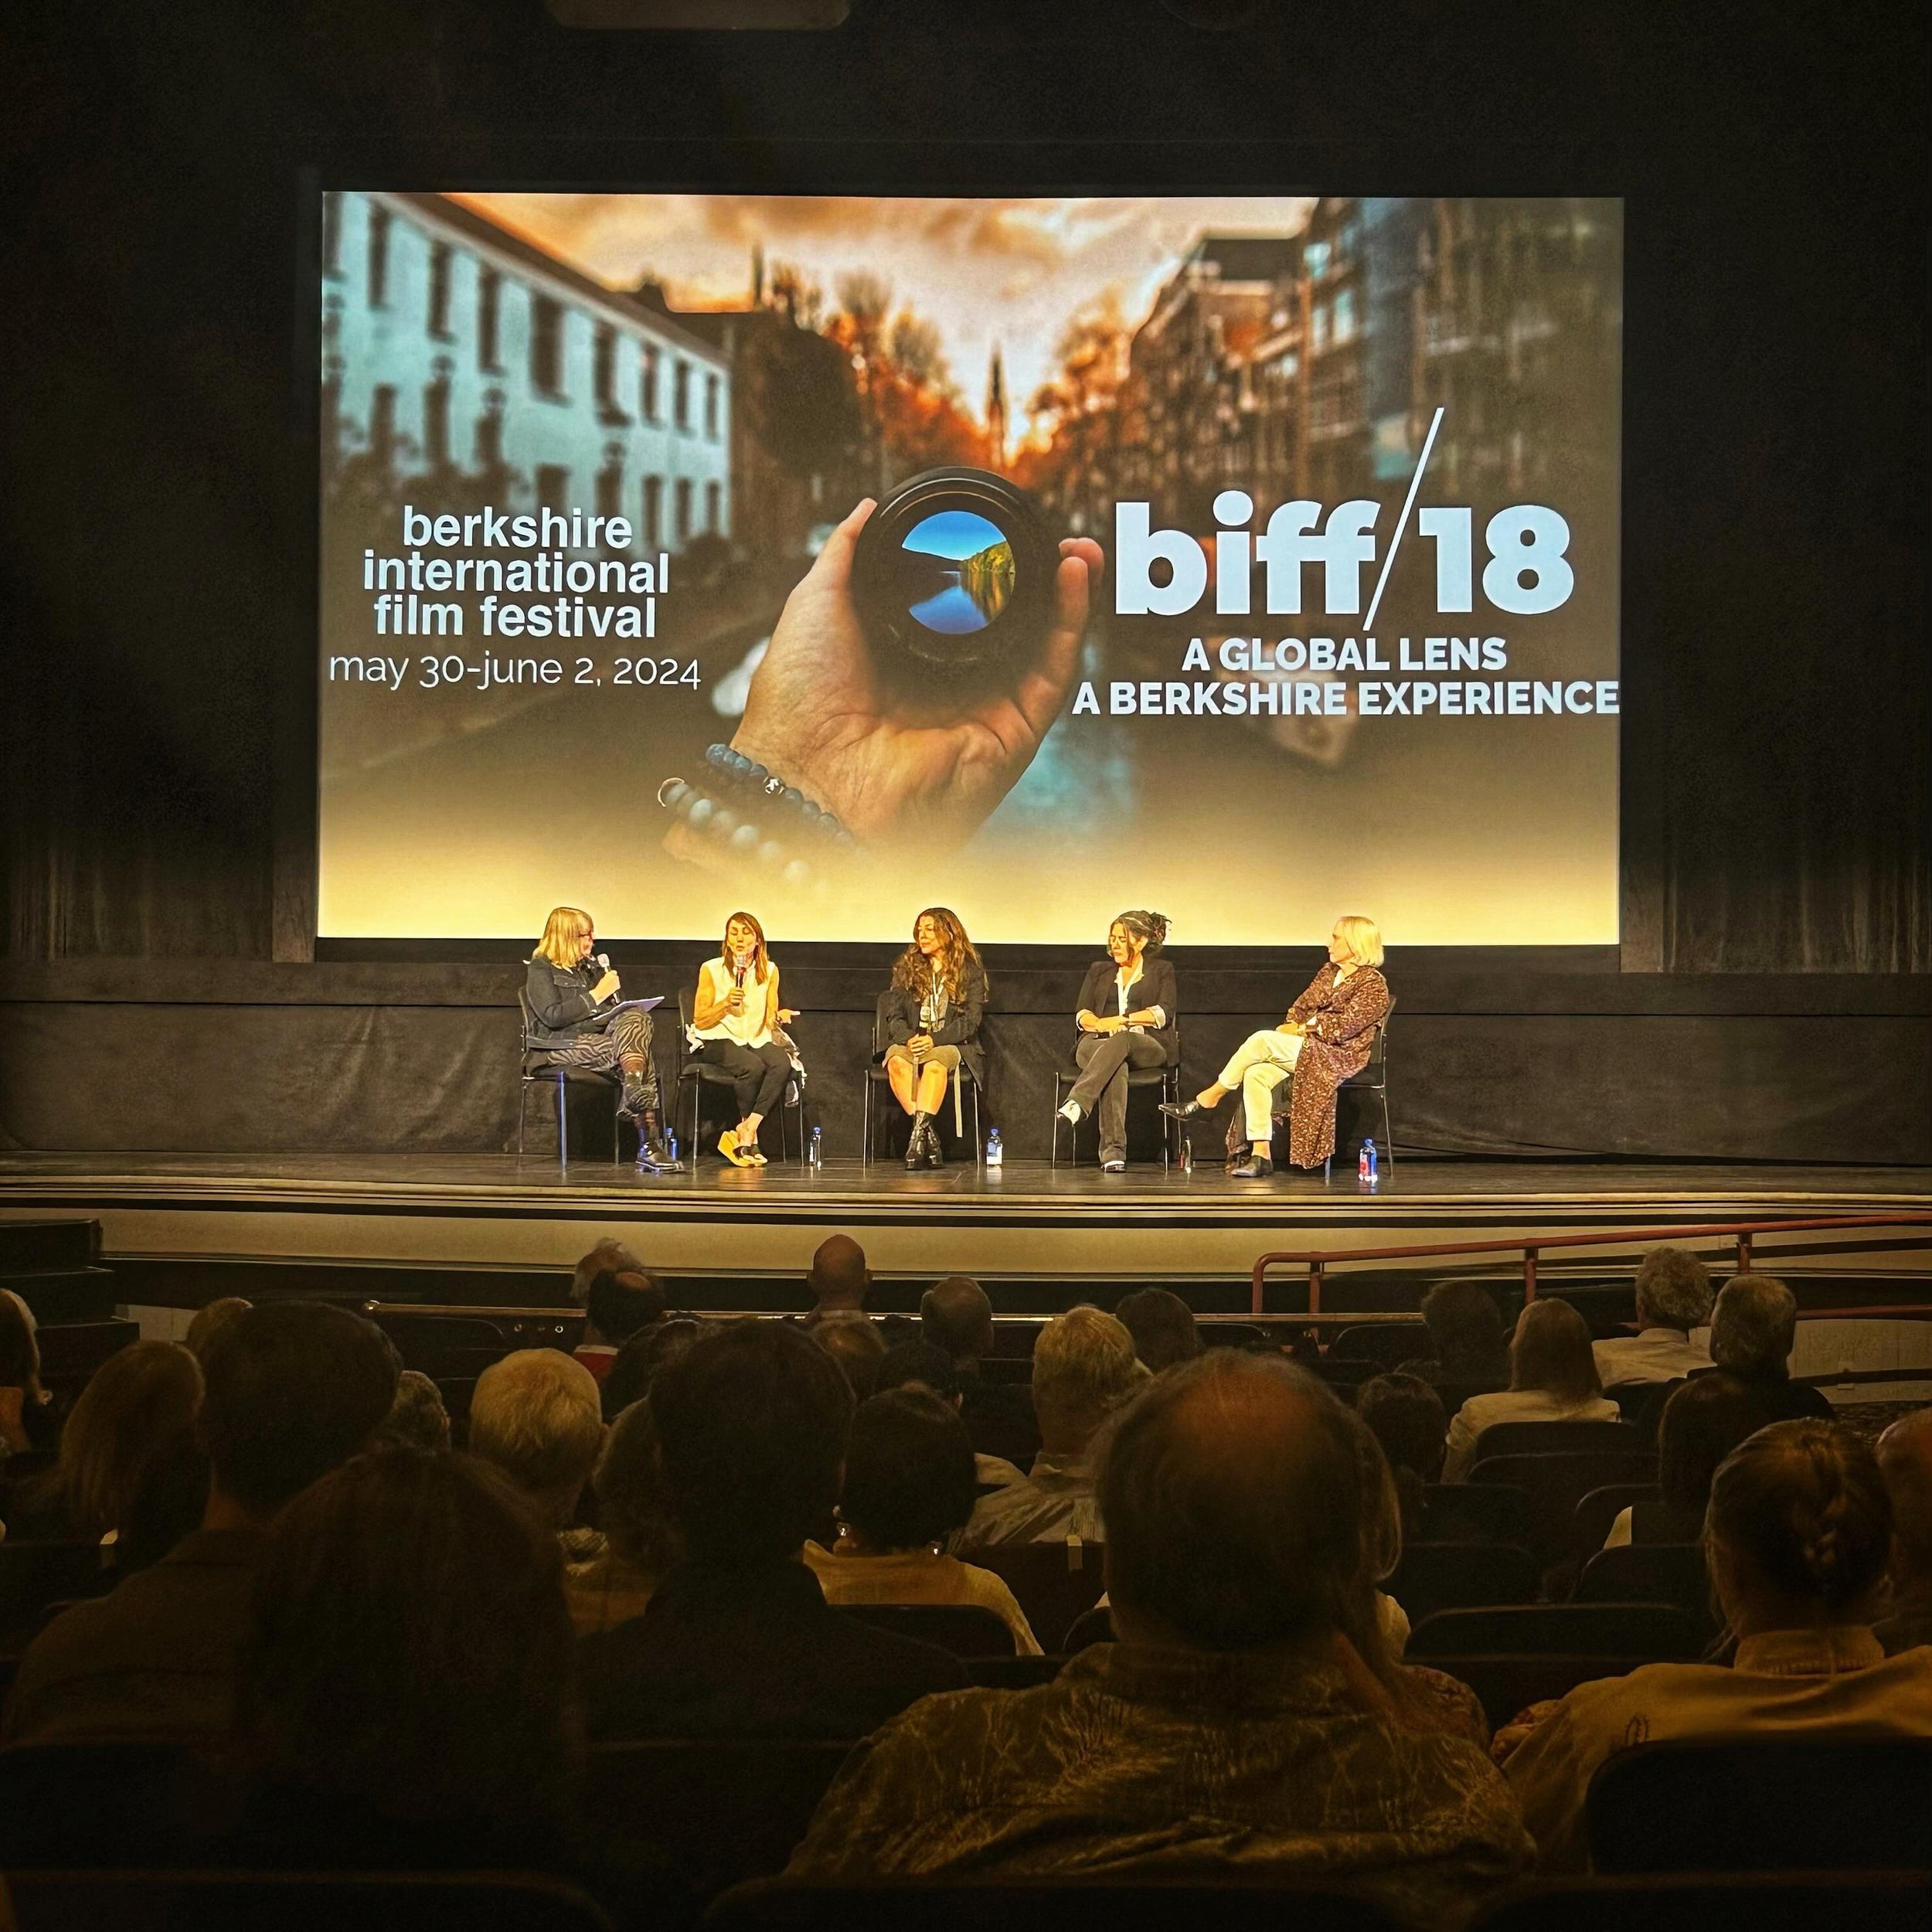 And that&rsquo;s a wrap! The finale of the Berkshire International Film Festival was nothing short of spectacular. The New England premiere of &ldquo;Diane Warren: Relentless,&rdquo; an intimate look at the life, career, and amazingness of one of the